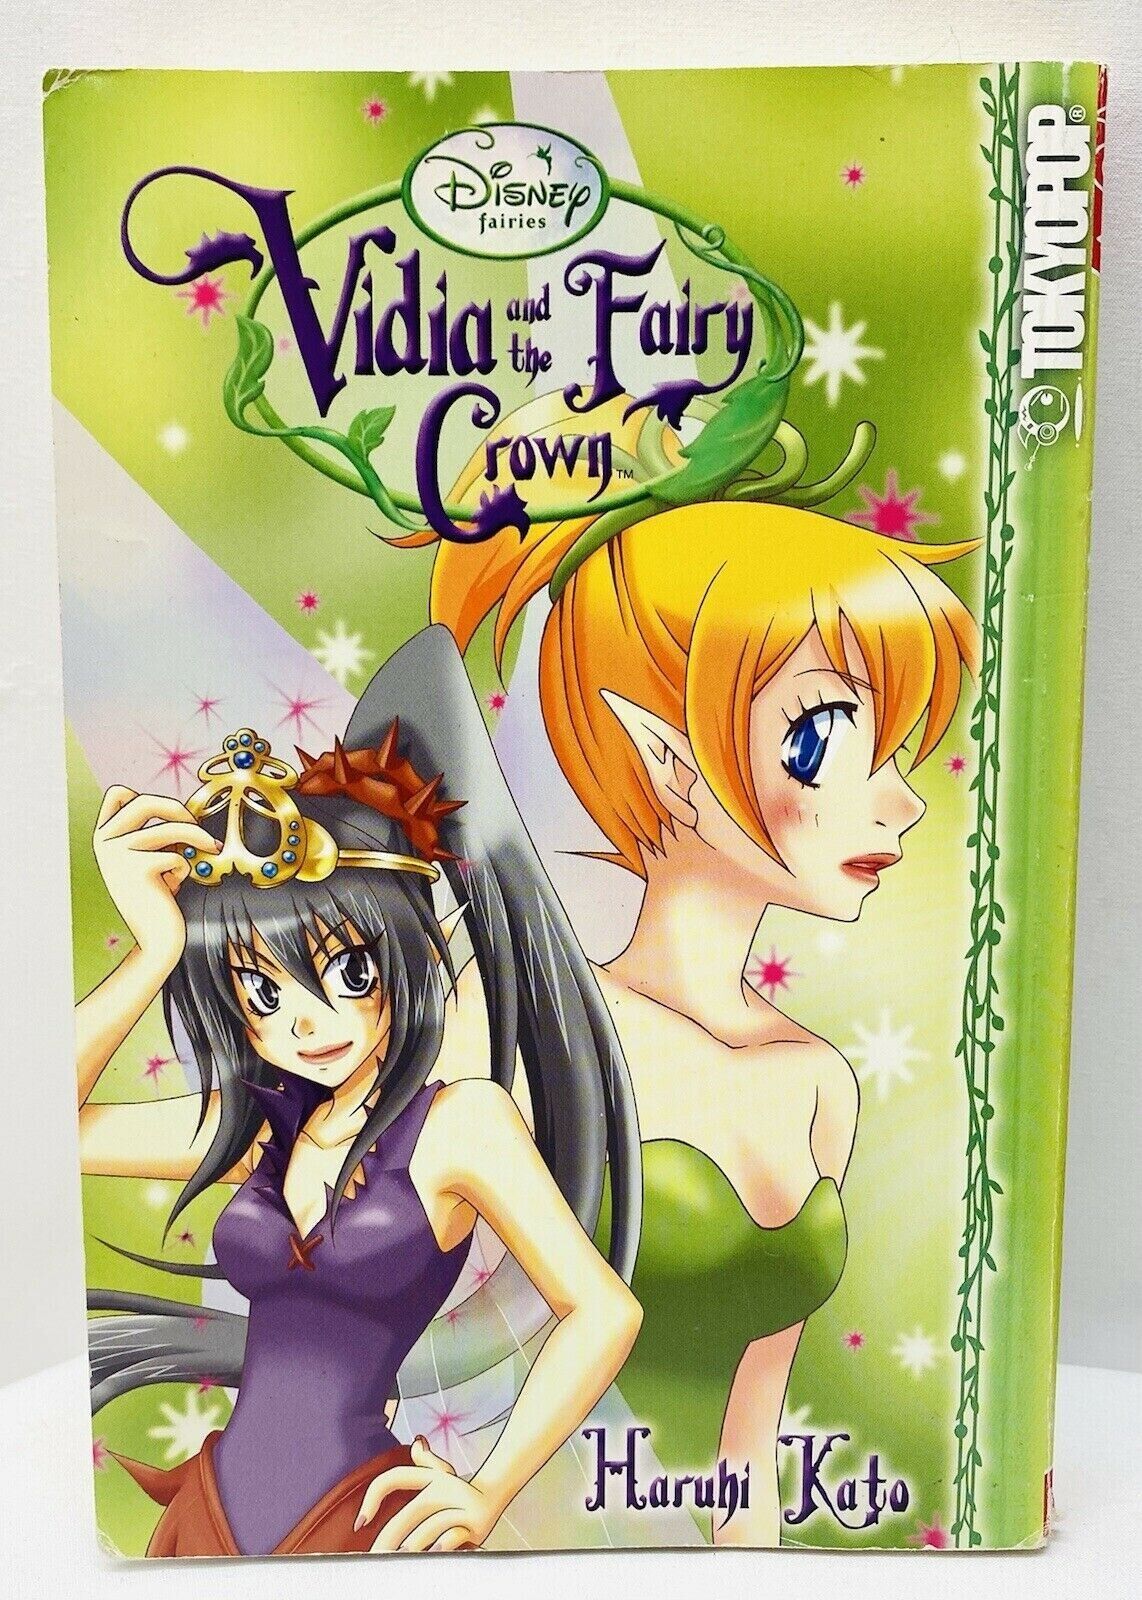 VIDIA AND THE FAIRY CROWN Graphic Novel By Haruhi Kato Paperback Disney Fairies